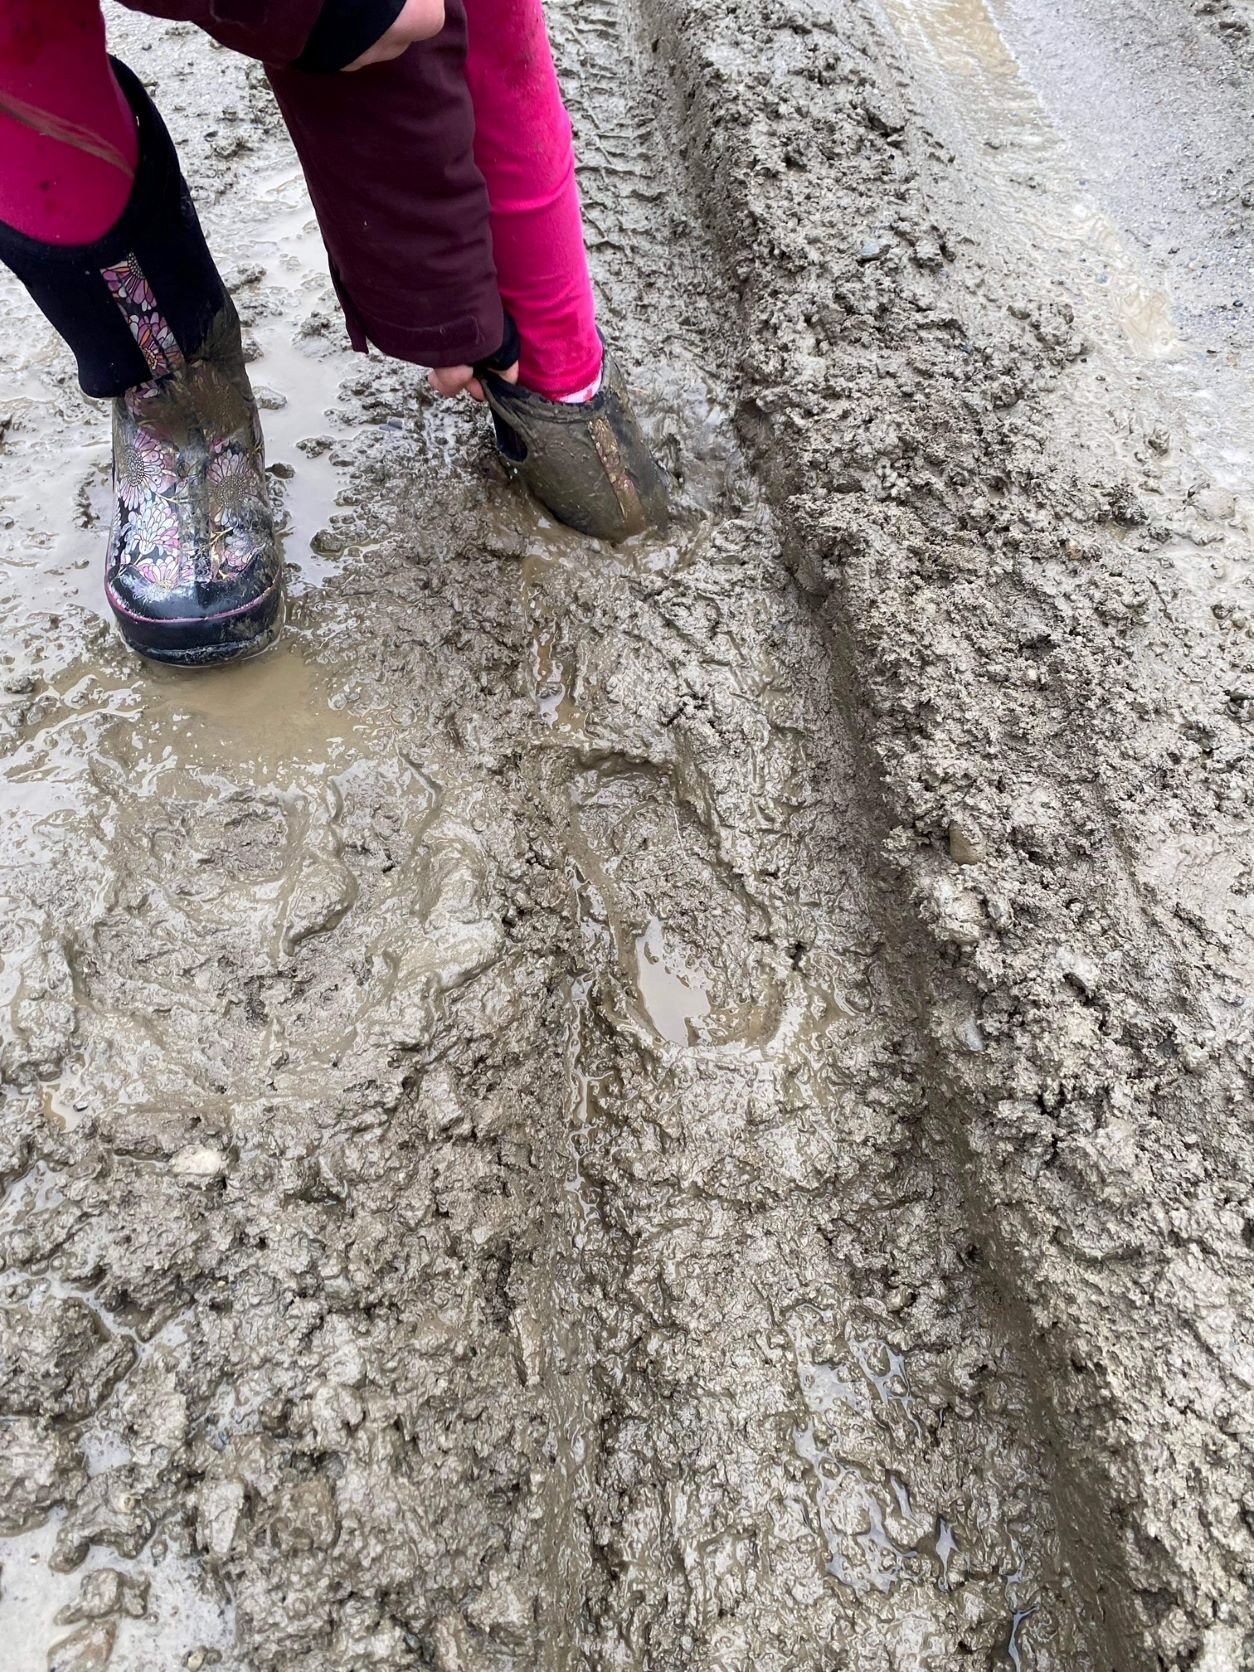  Emaline Dubois nearly loses a mud boot in a rut on Crossett Hill in Duxbury. Photo by Molly Dubois 